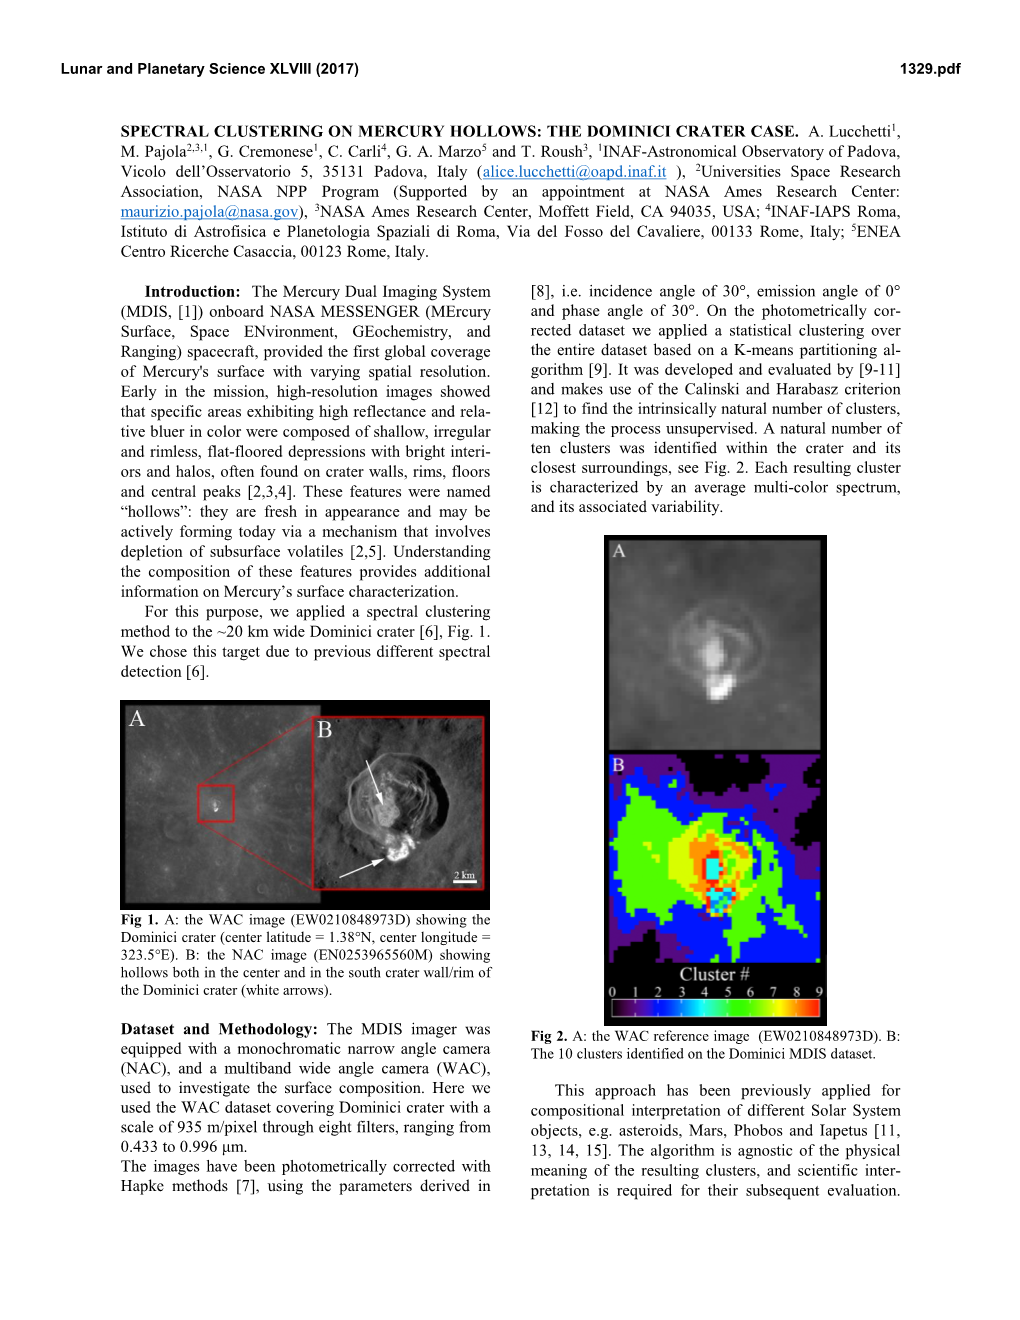 Spectral Clustering on Mercury Hollows: the Dominici Crater Case